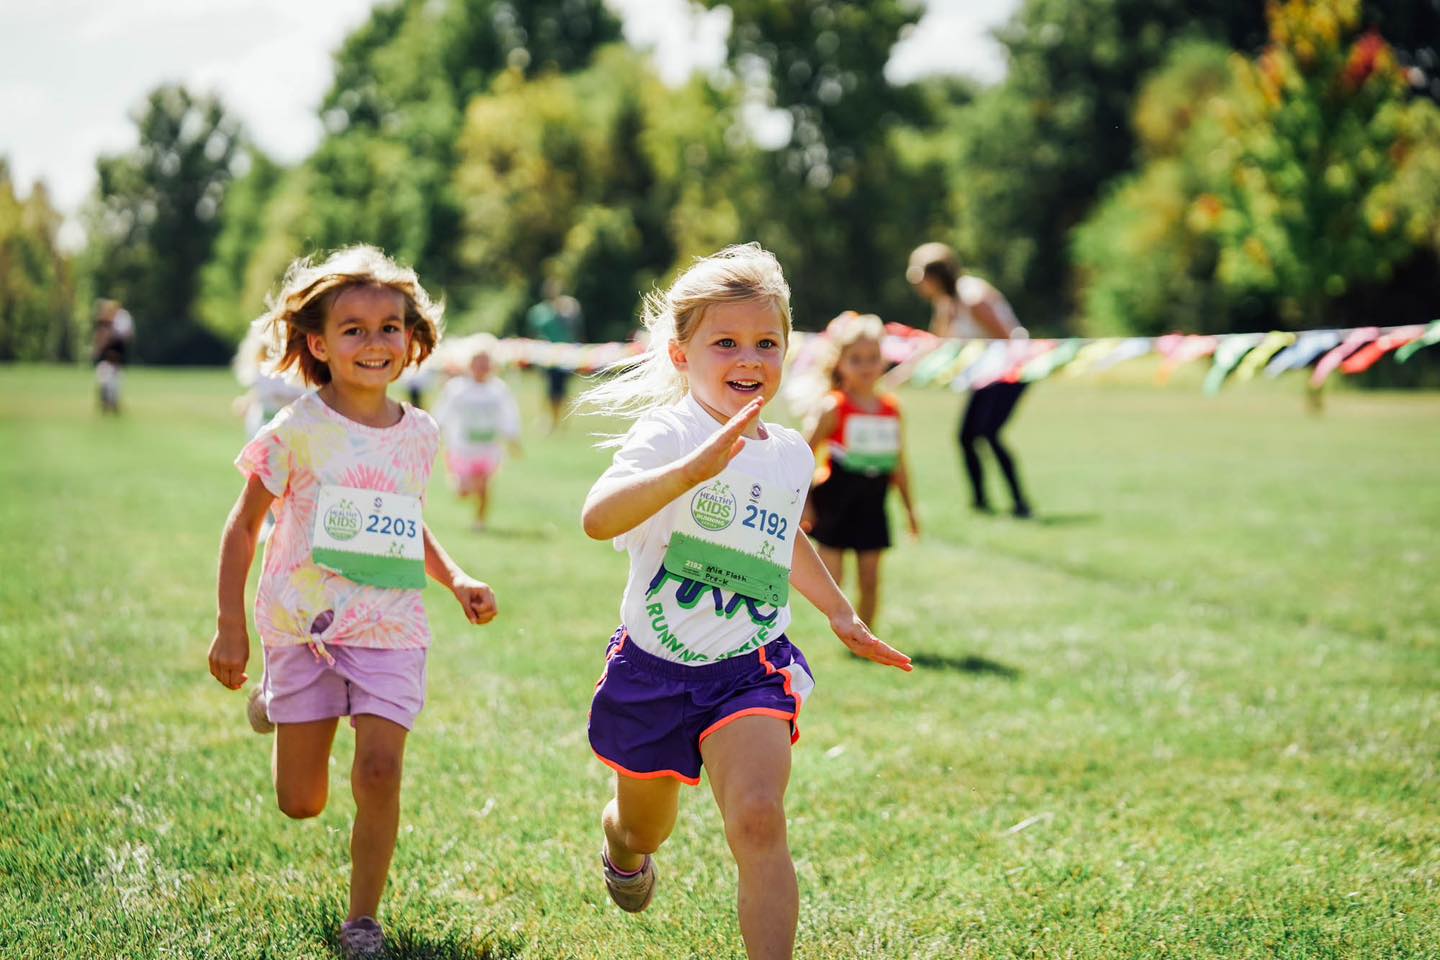 Fall Registration Now Open for Healthy Kids Running Series in Cypress